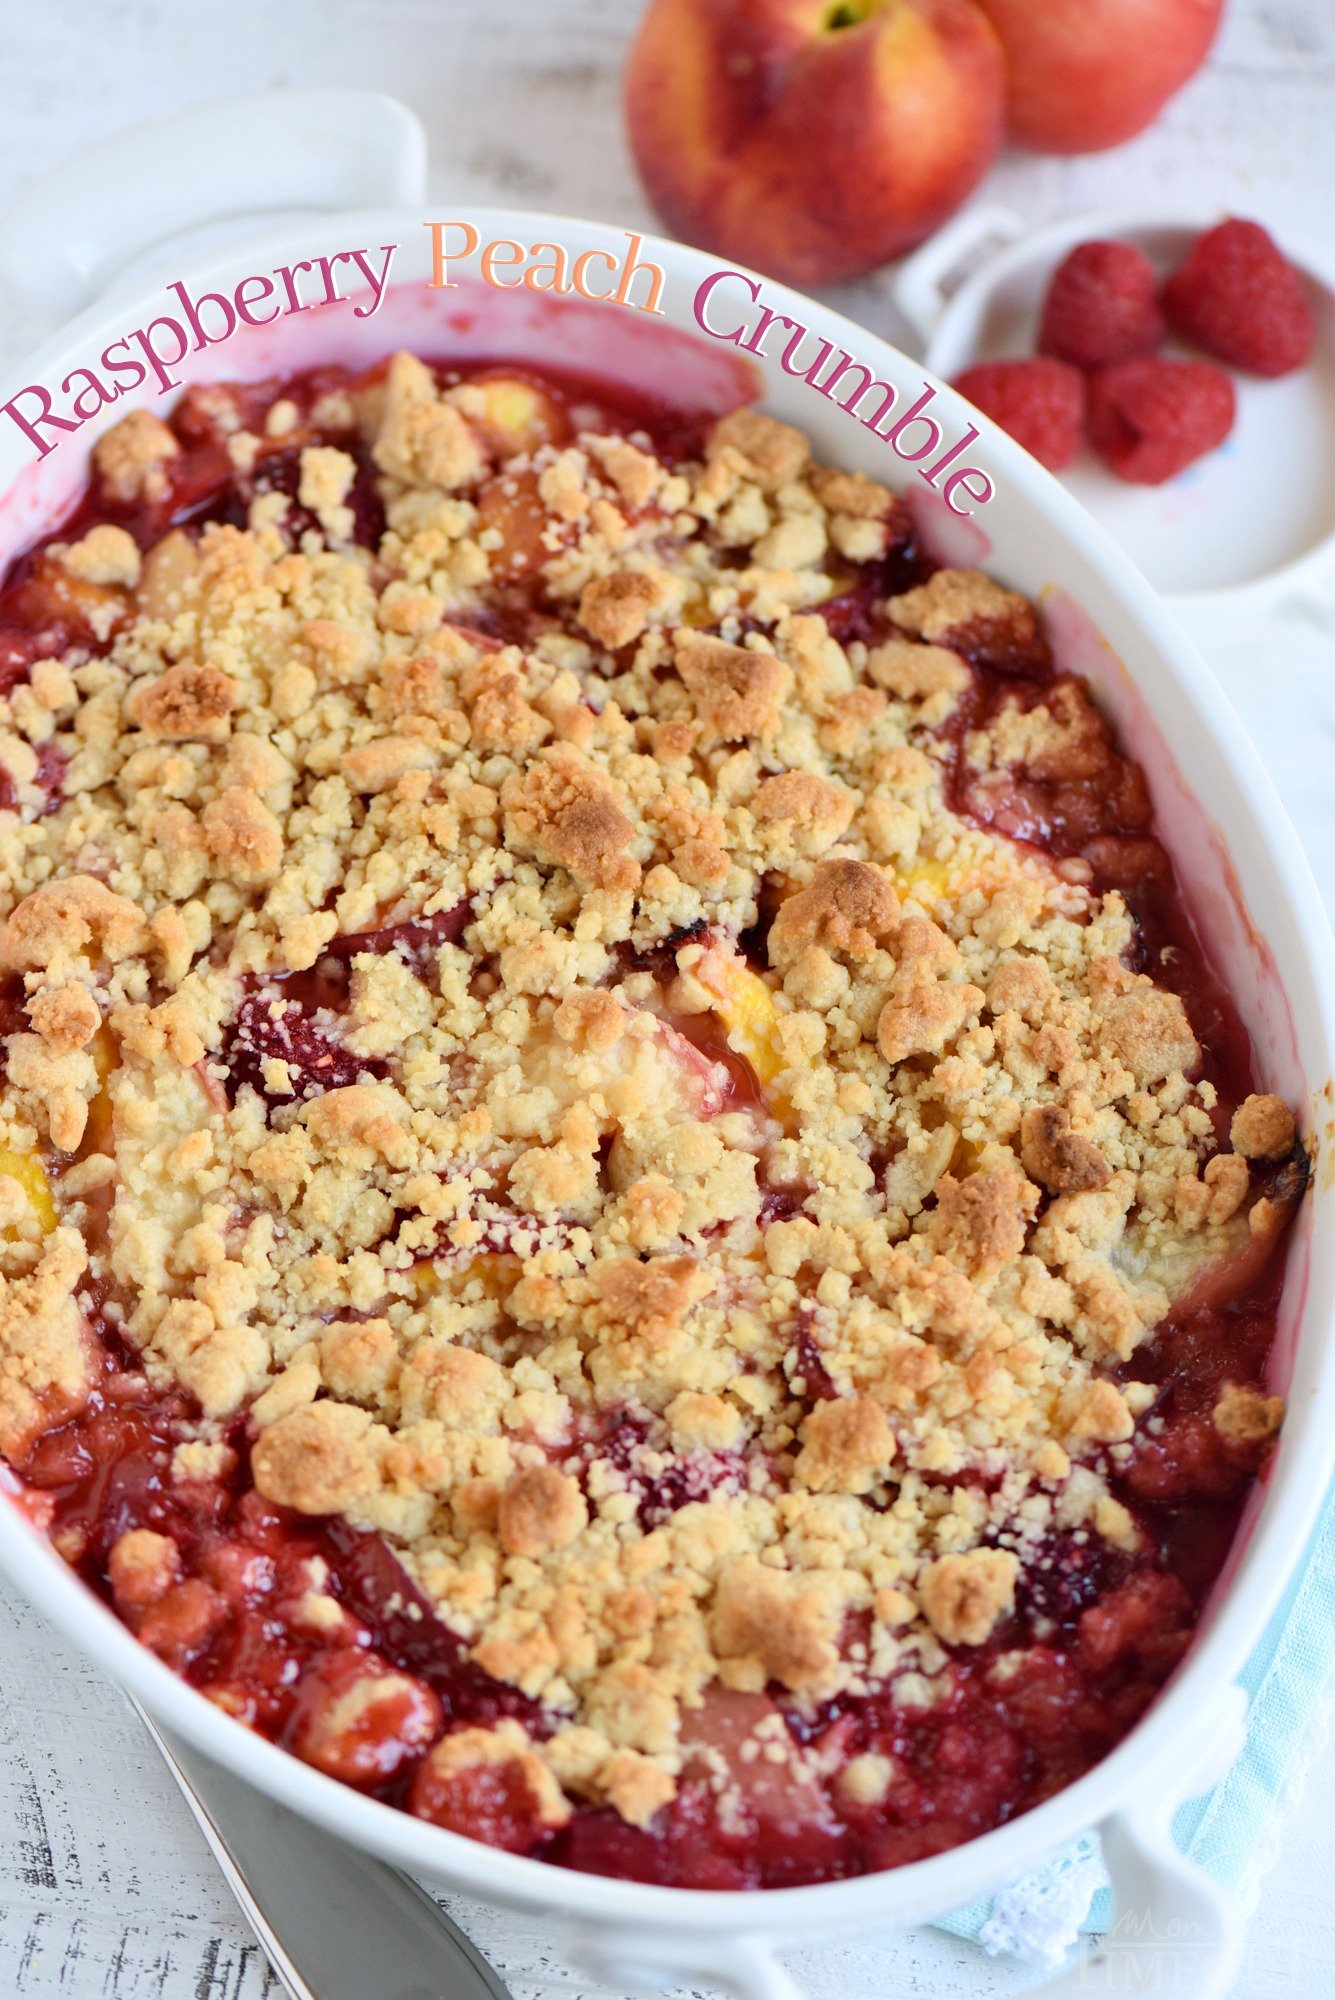 peach crumble with raspberries nectarines and easy topping in dish with peaches and raspberries